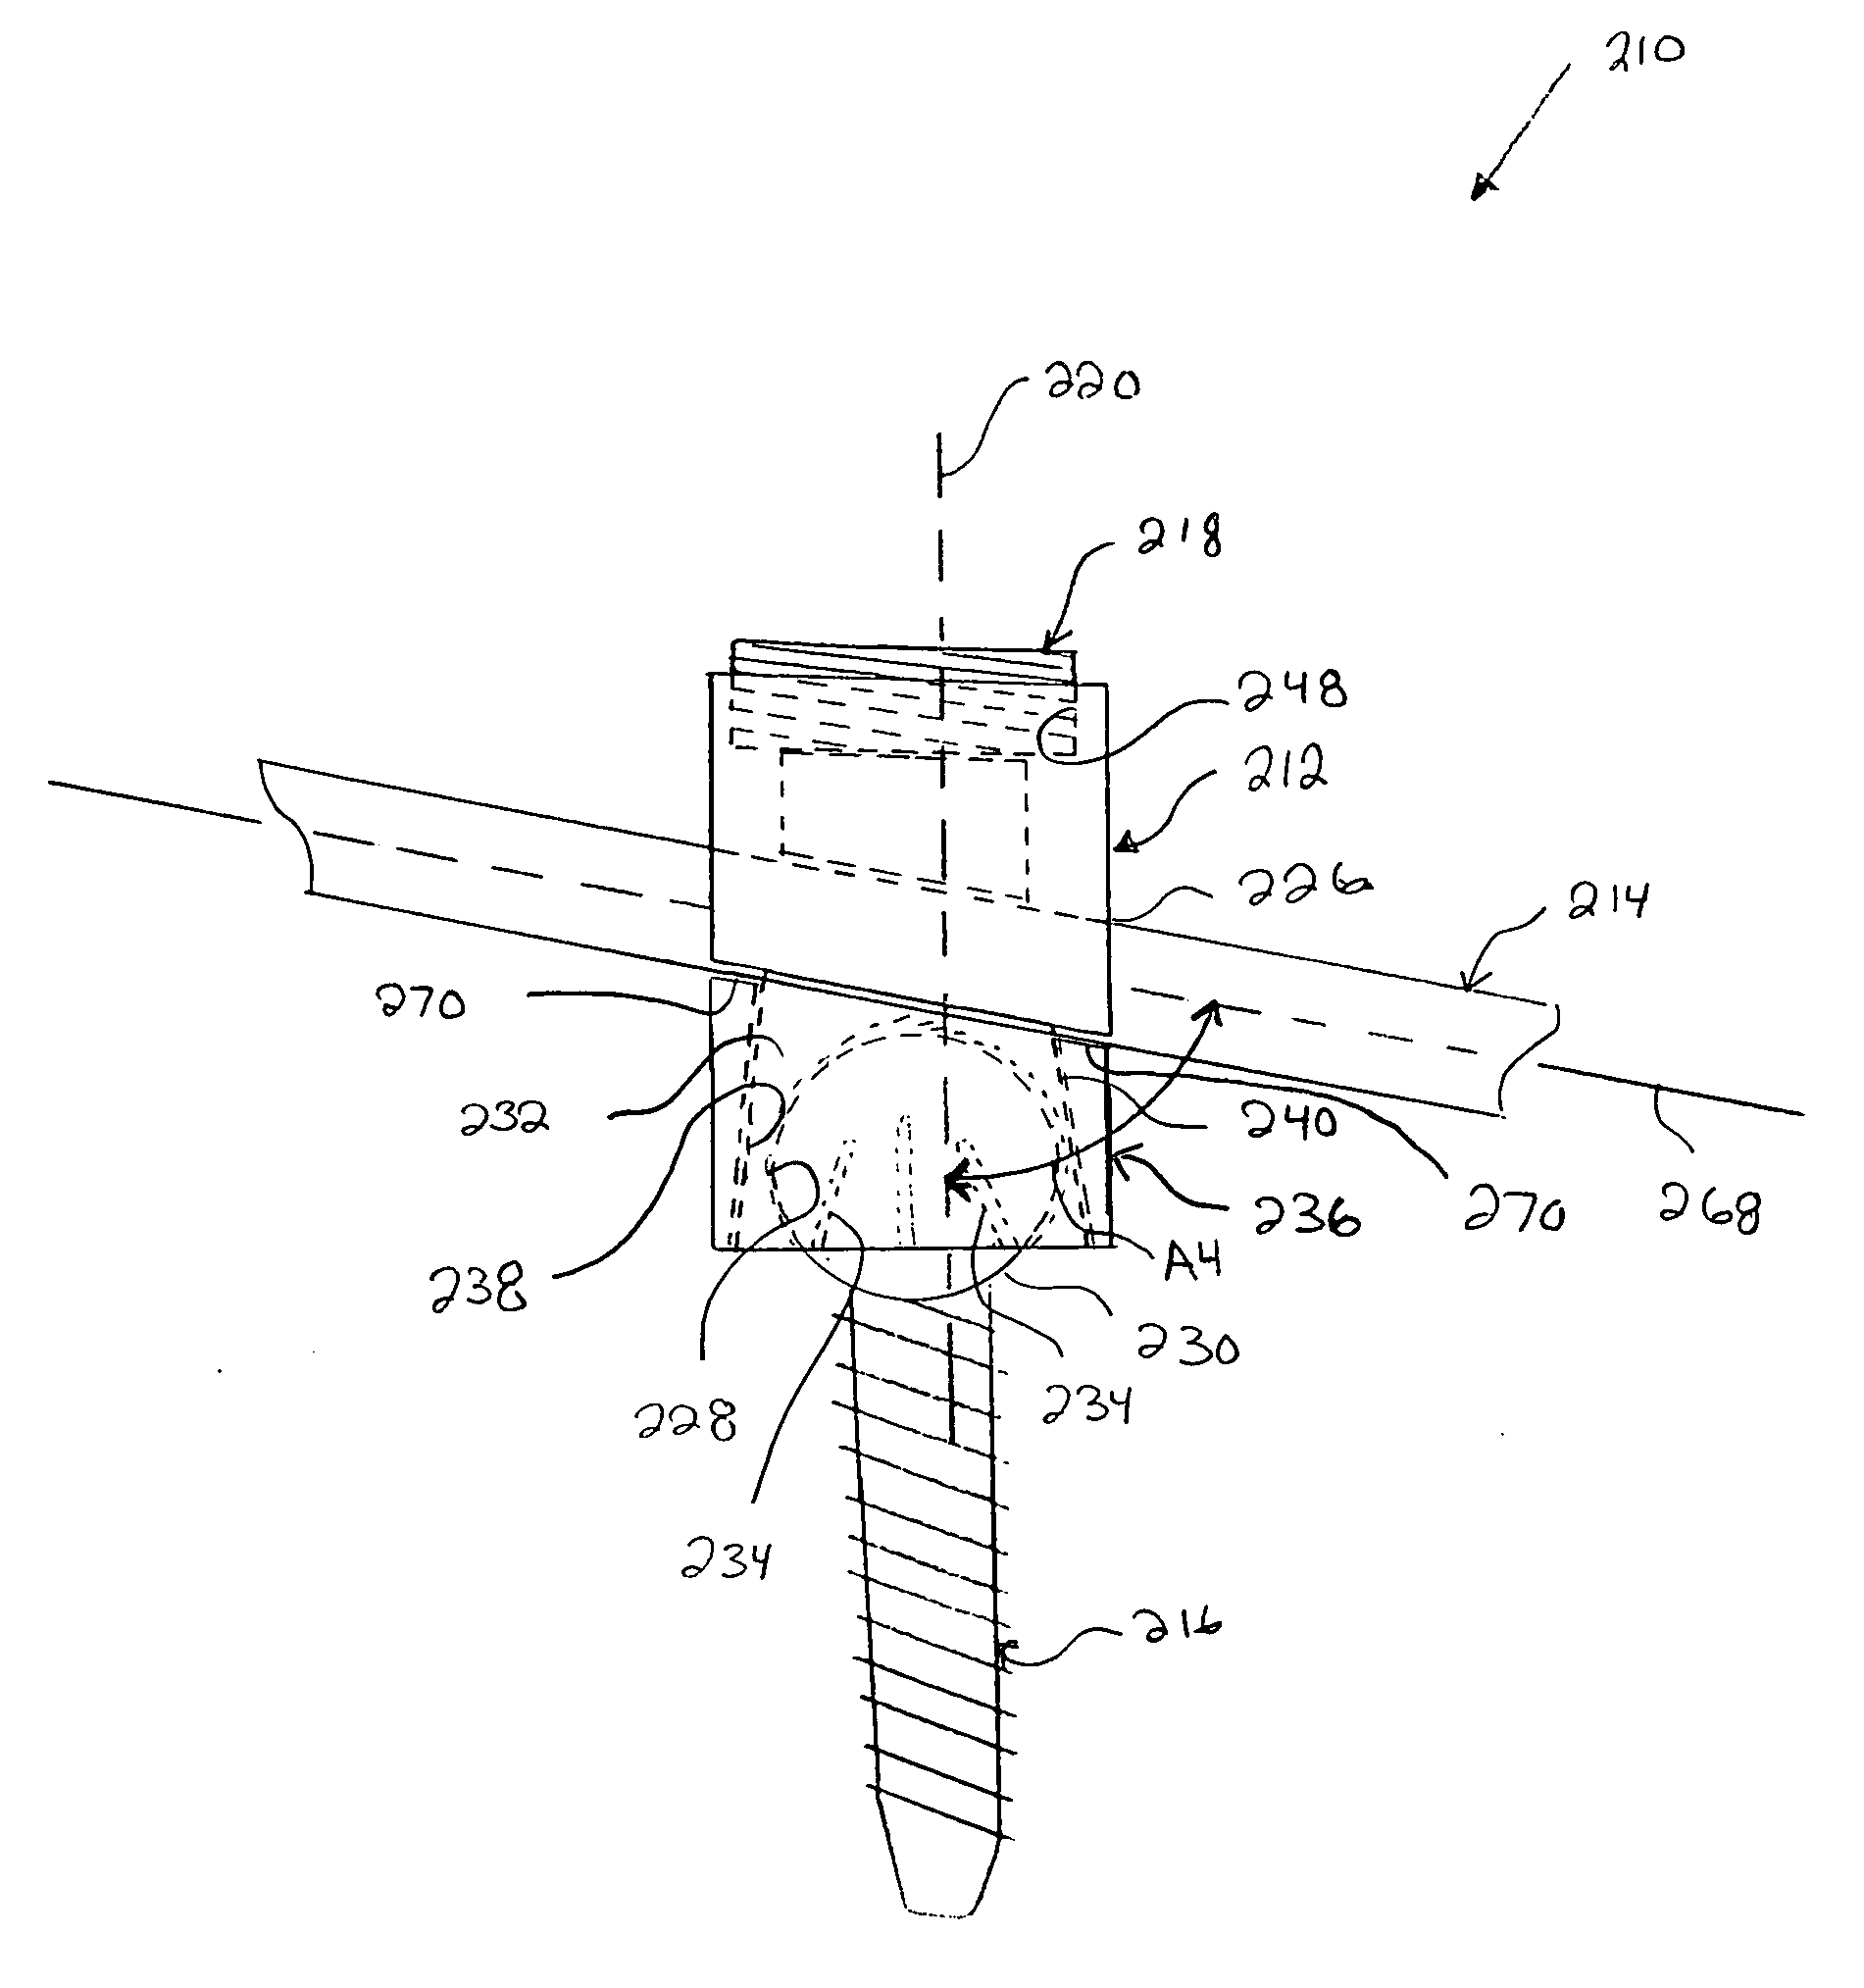 Polyaxial bone anchor and method of spinal fixation